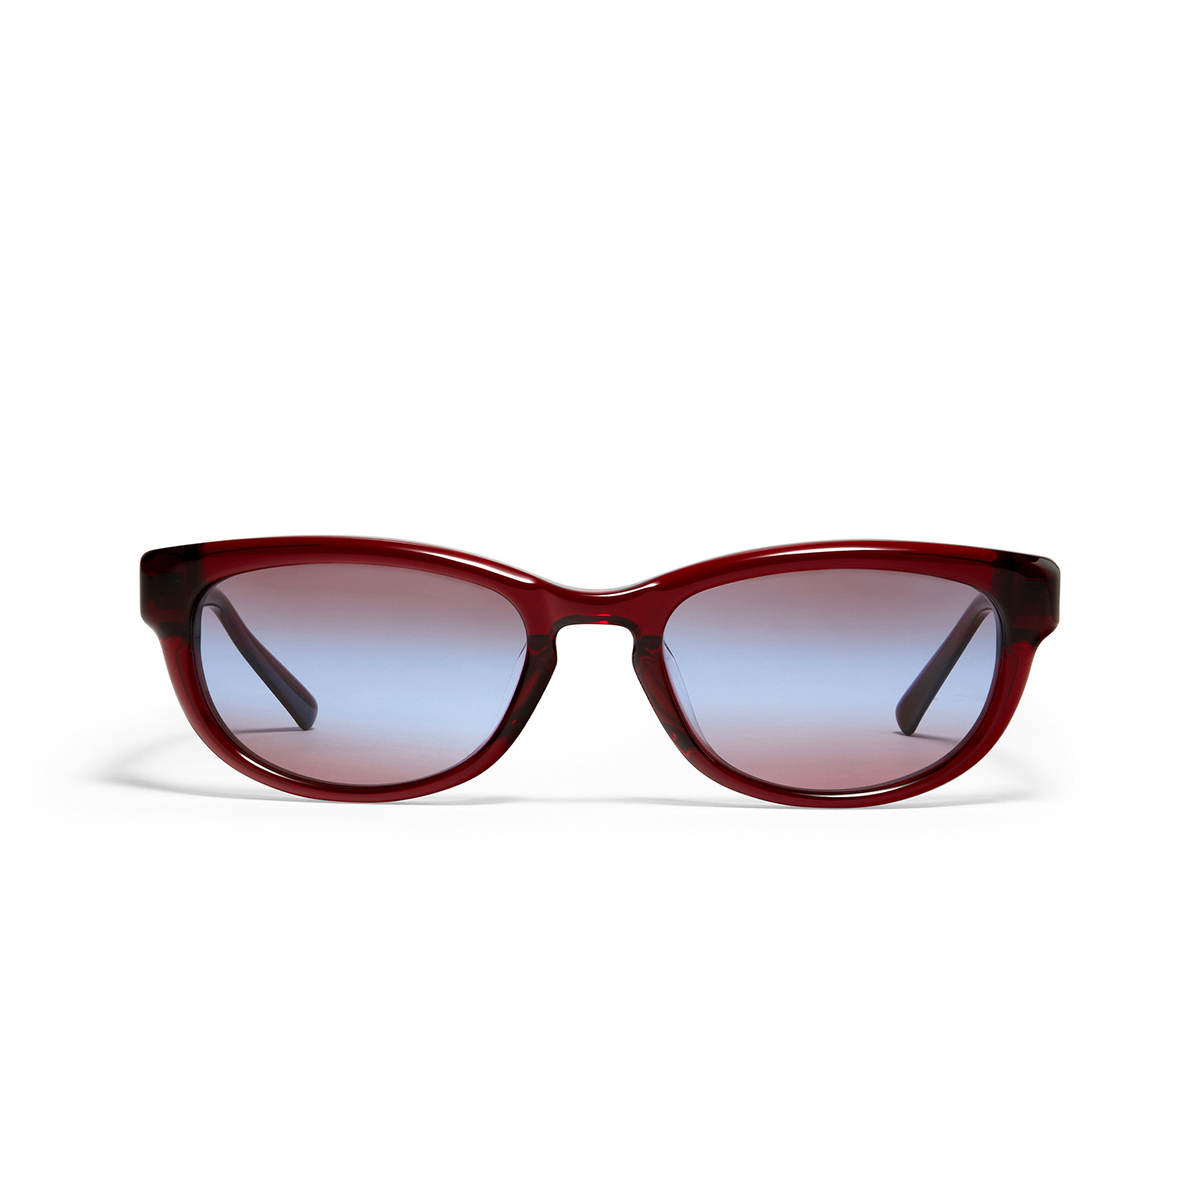 Gentle Monster® Cat-eye Sunglasses: Reny color RC2 Red - front view